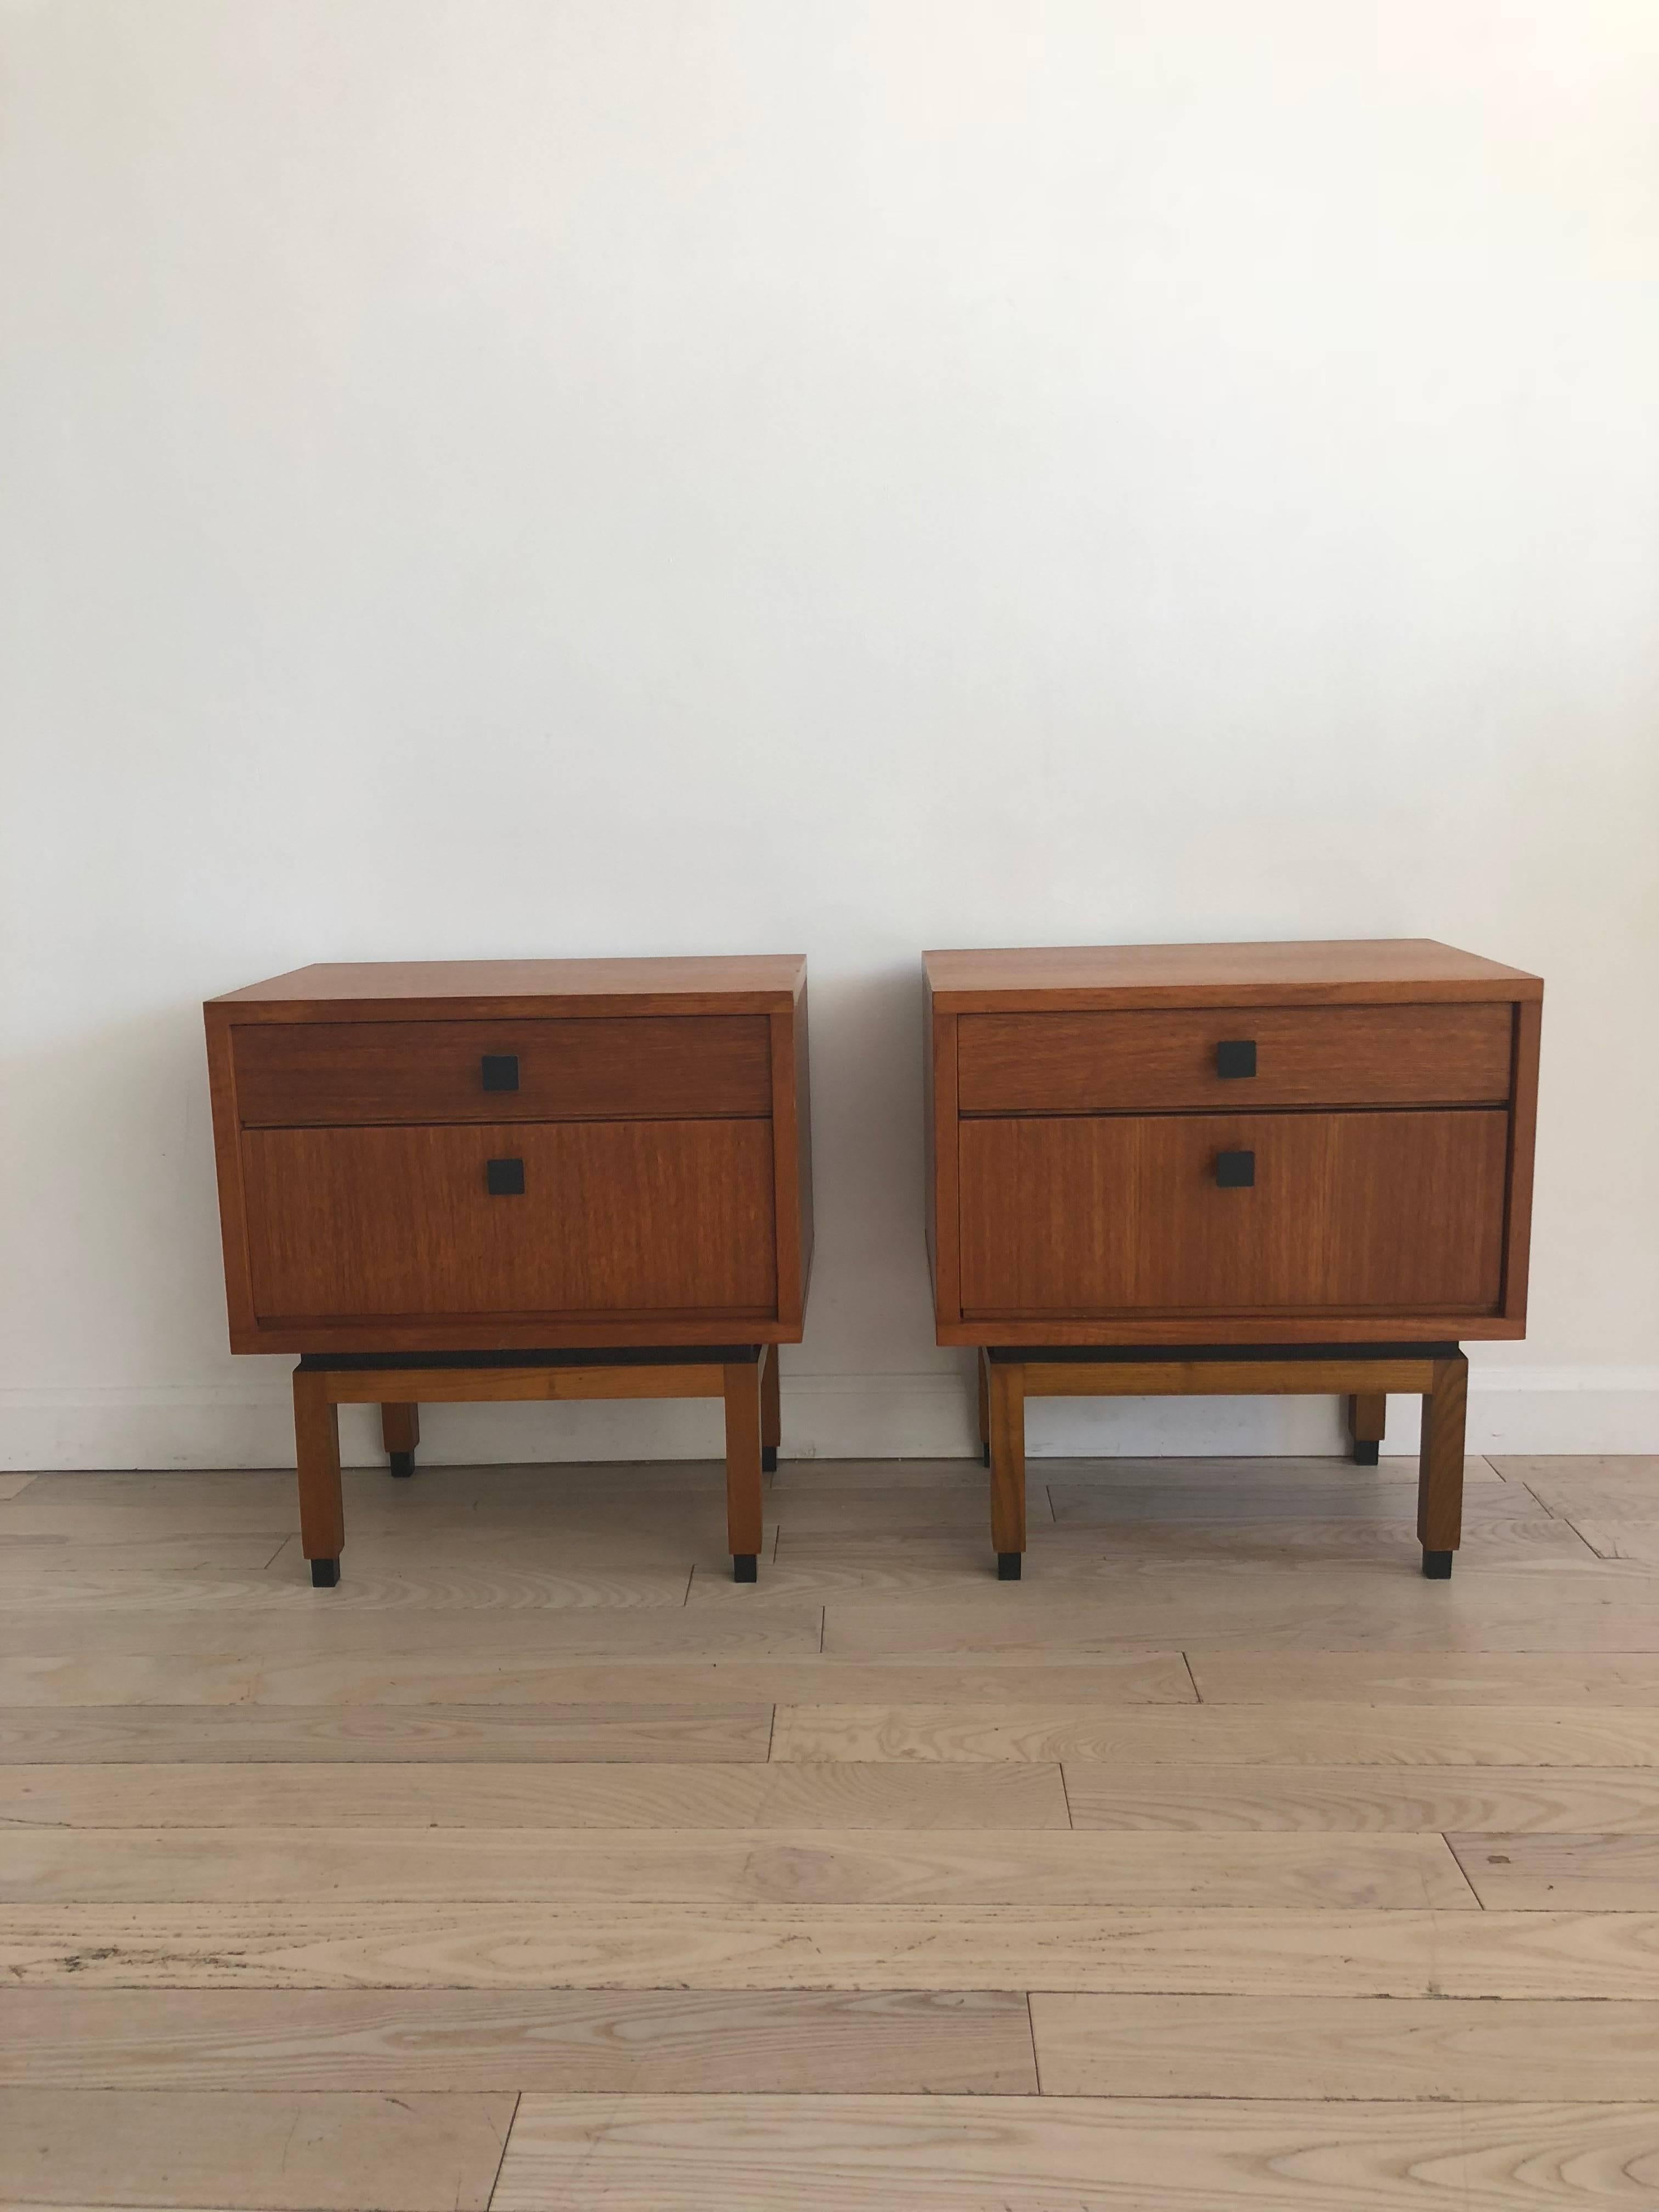 Super cute square shaped pair of midcentury teak nightstands. Cute square legs and square body with square pulls. Excellent vintage condition. Pretty grained teak. Top drawer in each with bottom cubby. Easy and smooth open and close. Rare pair. Made